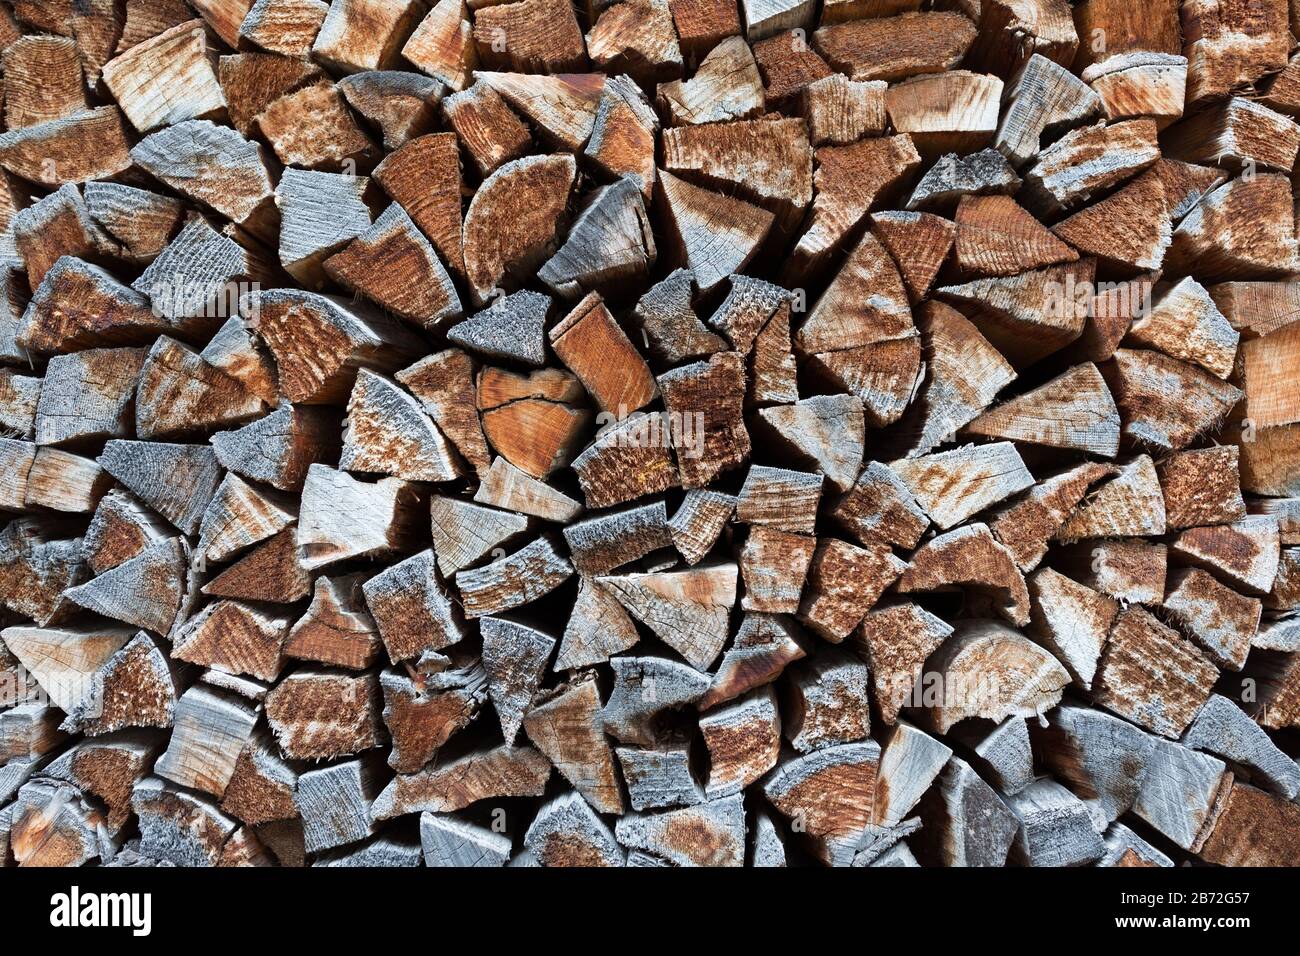 Isolated close up of stacked fire wood / cut wood - piled up against a wall. Most logs have a triangle shape. Symbol for warmth, heat, winter time. Stock Photo